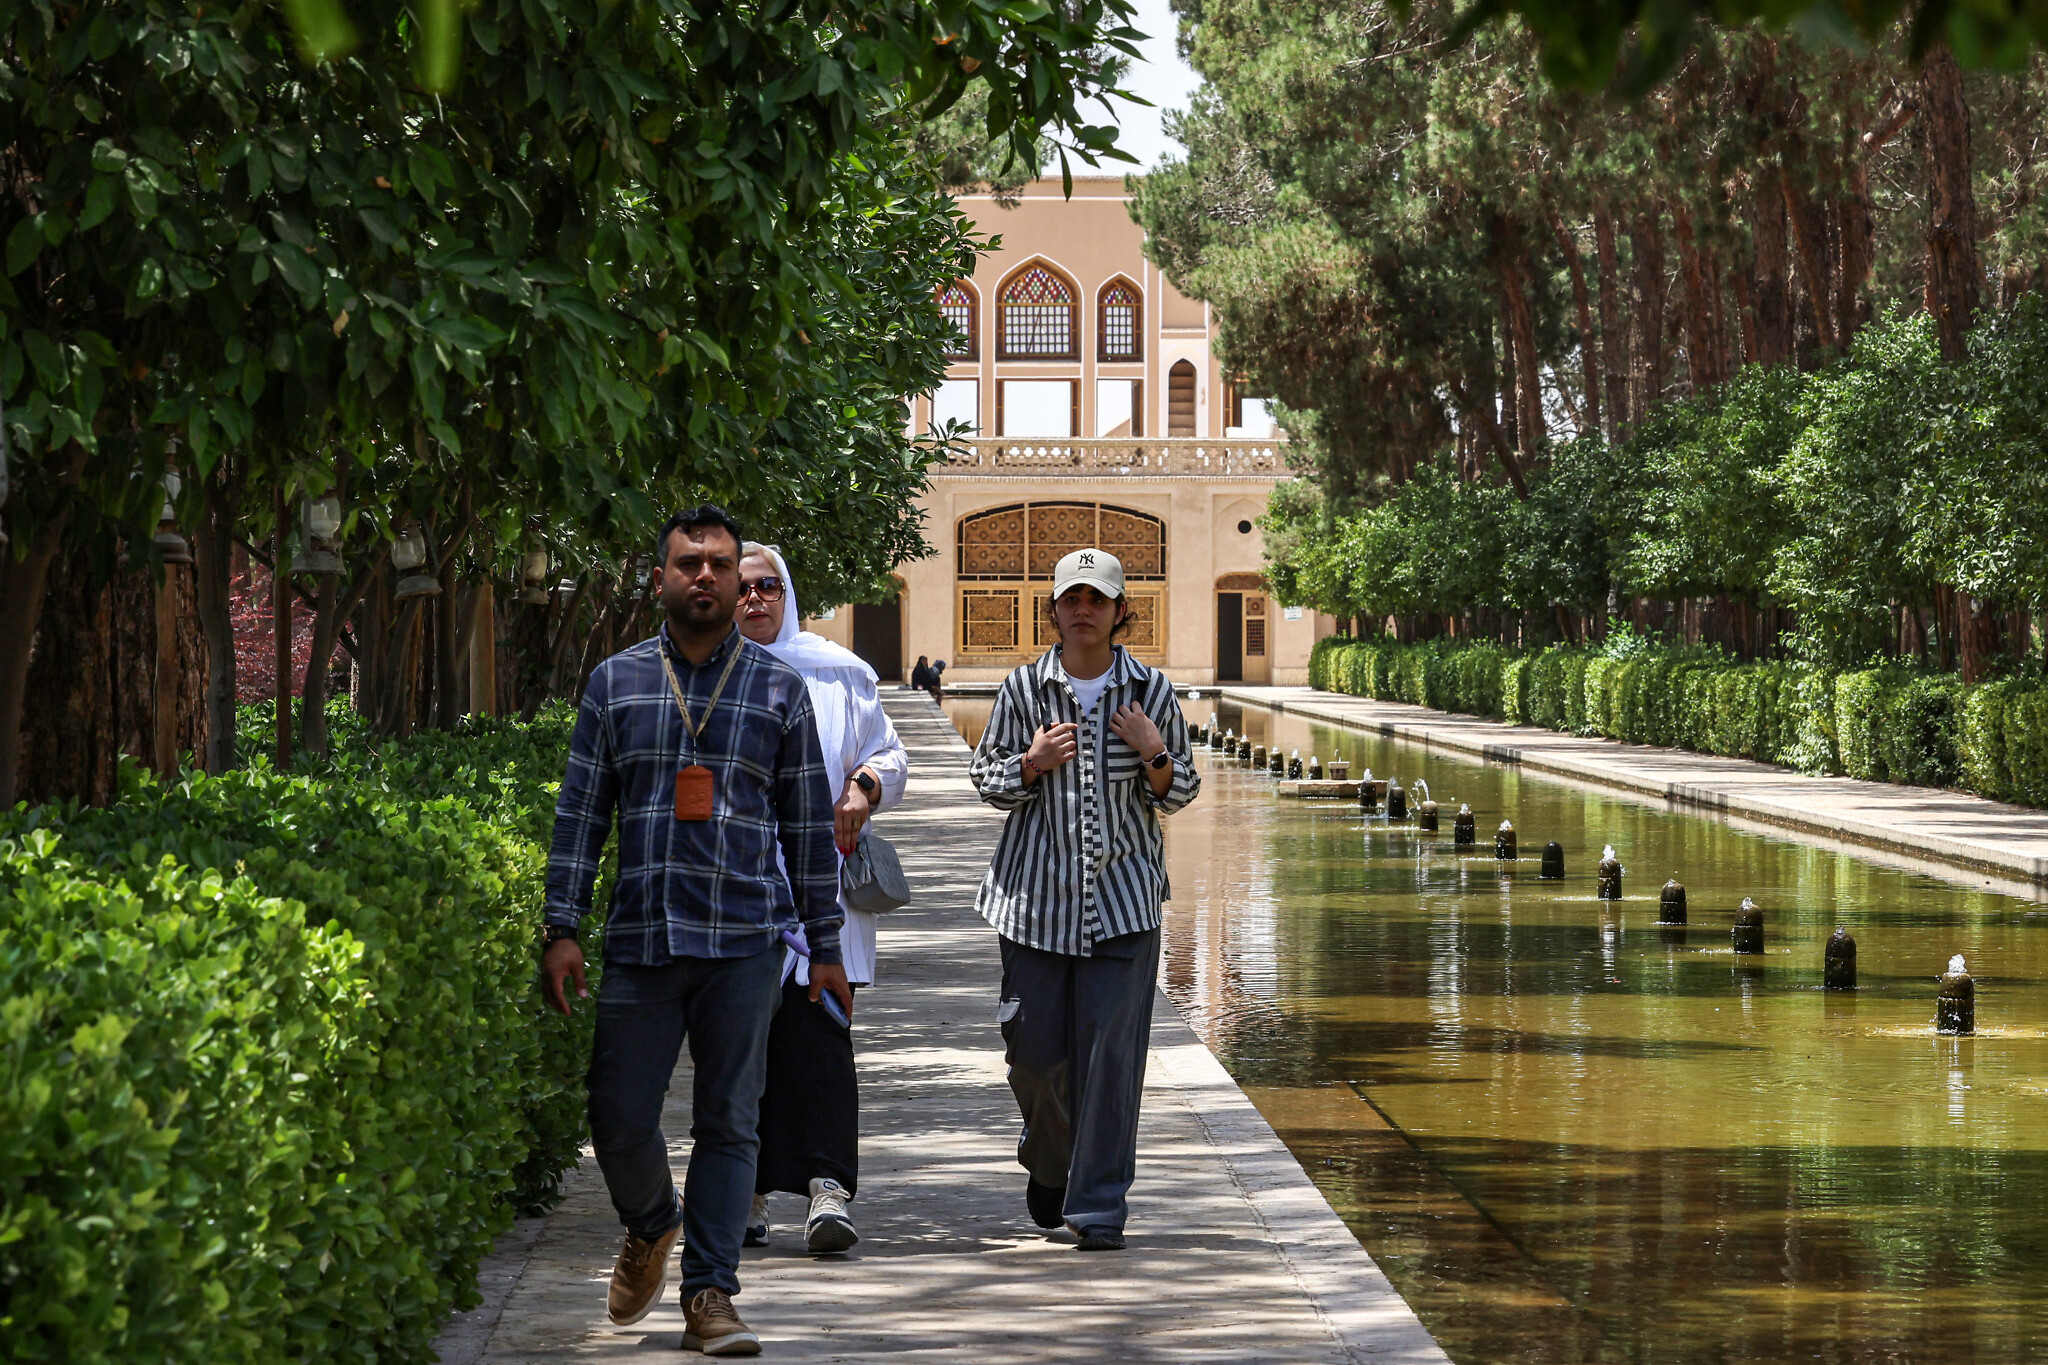 Shunned by Western tourists, Iran looks to attract visitors from its  neighbors